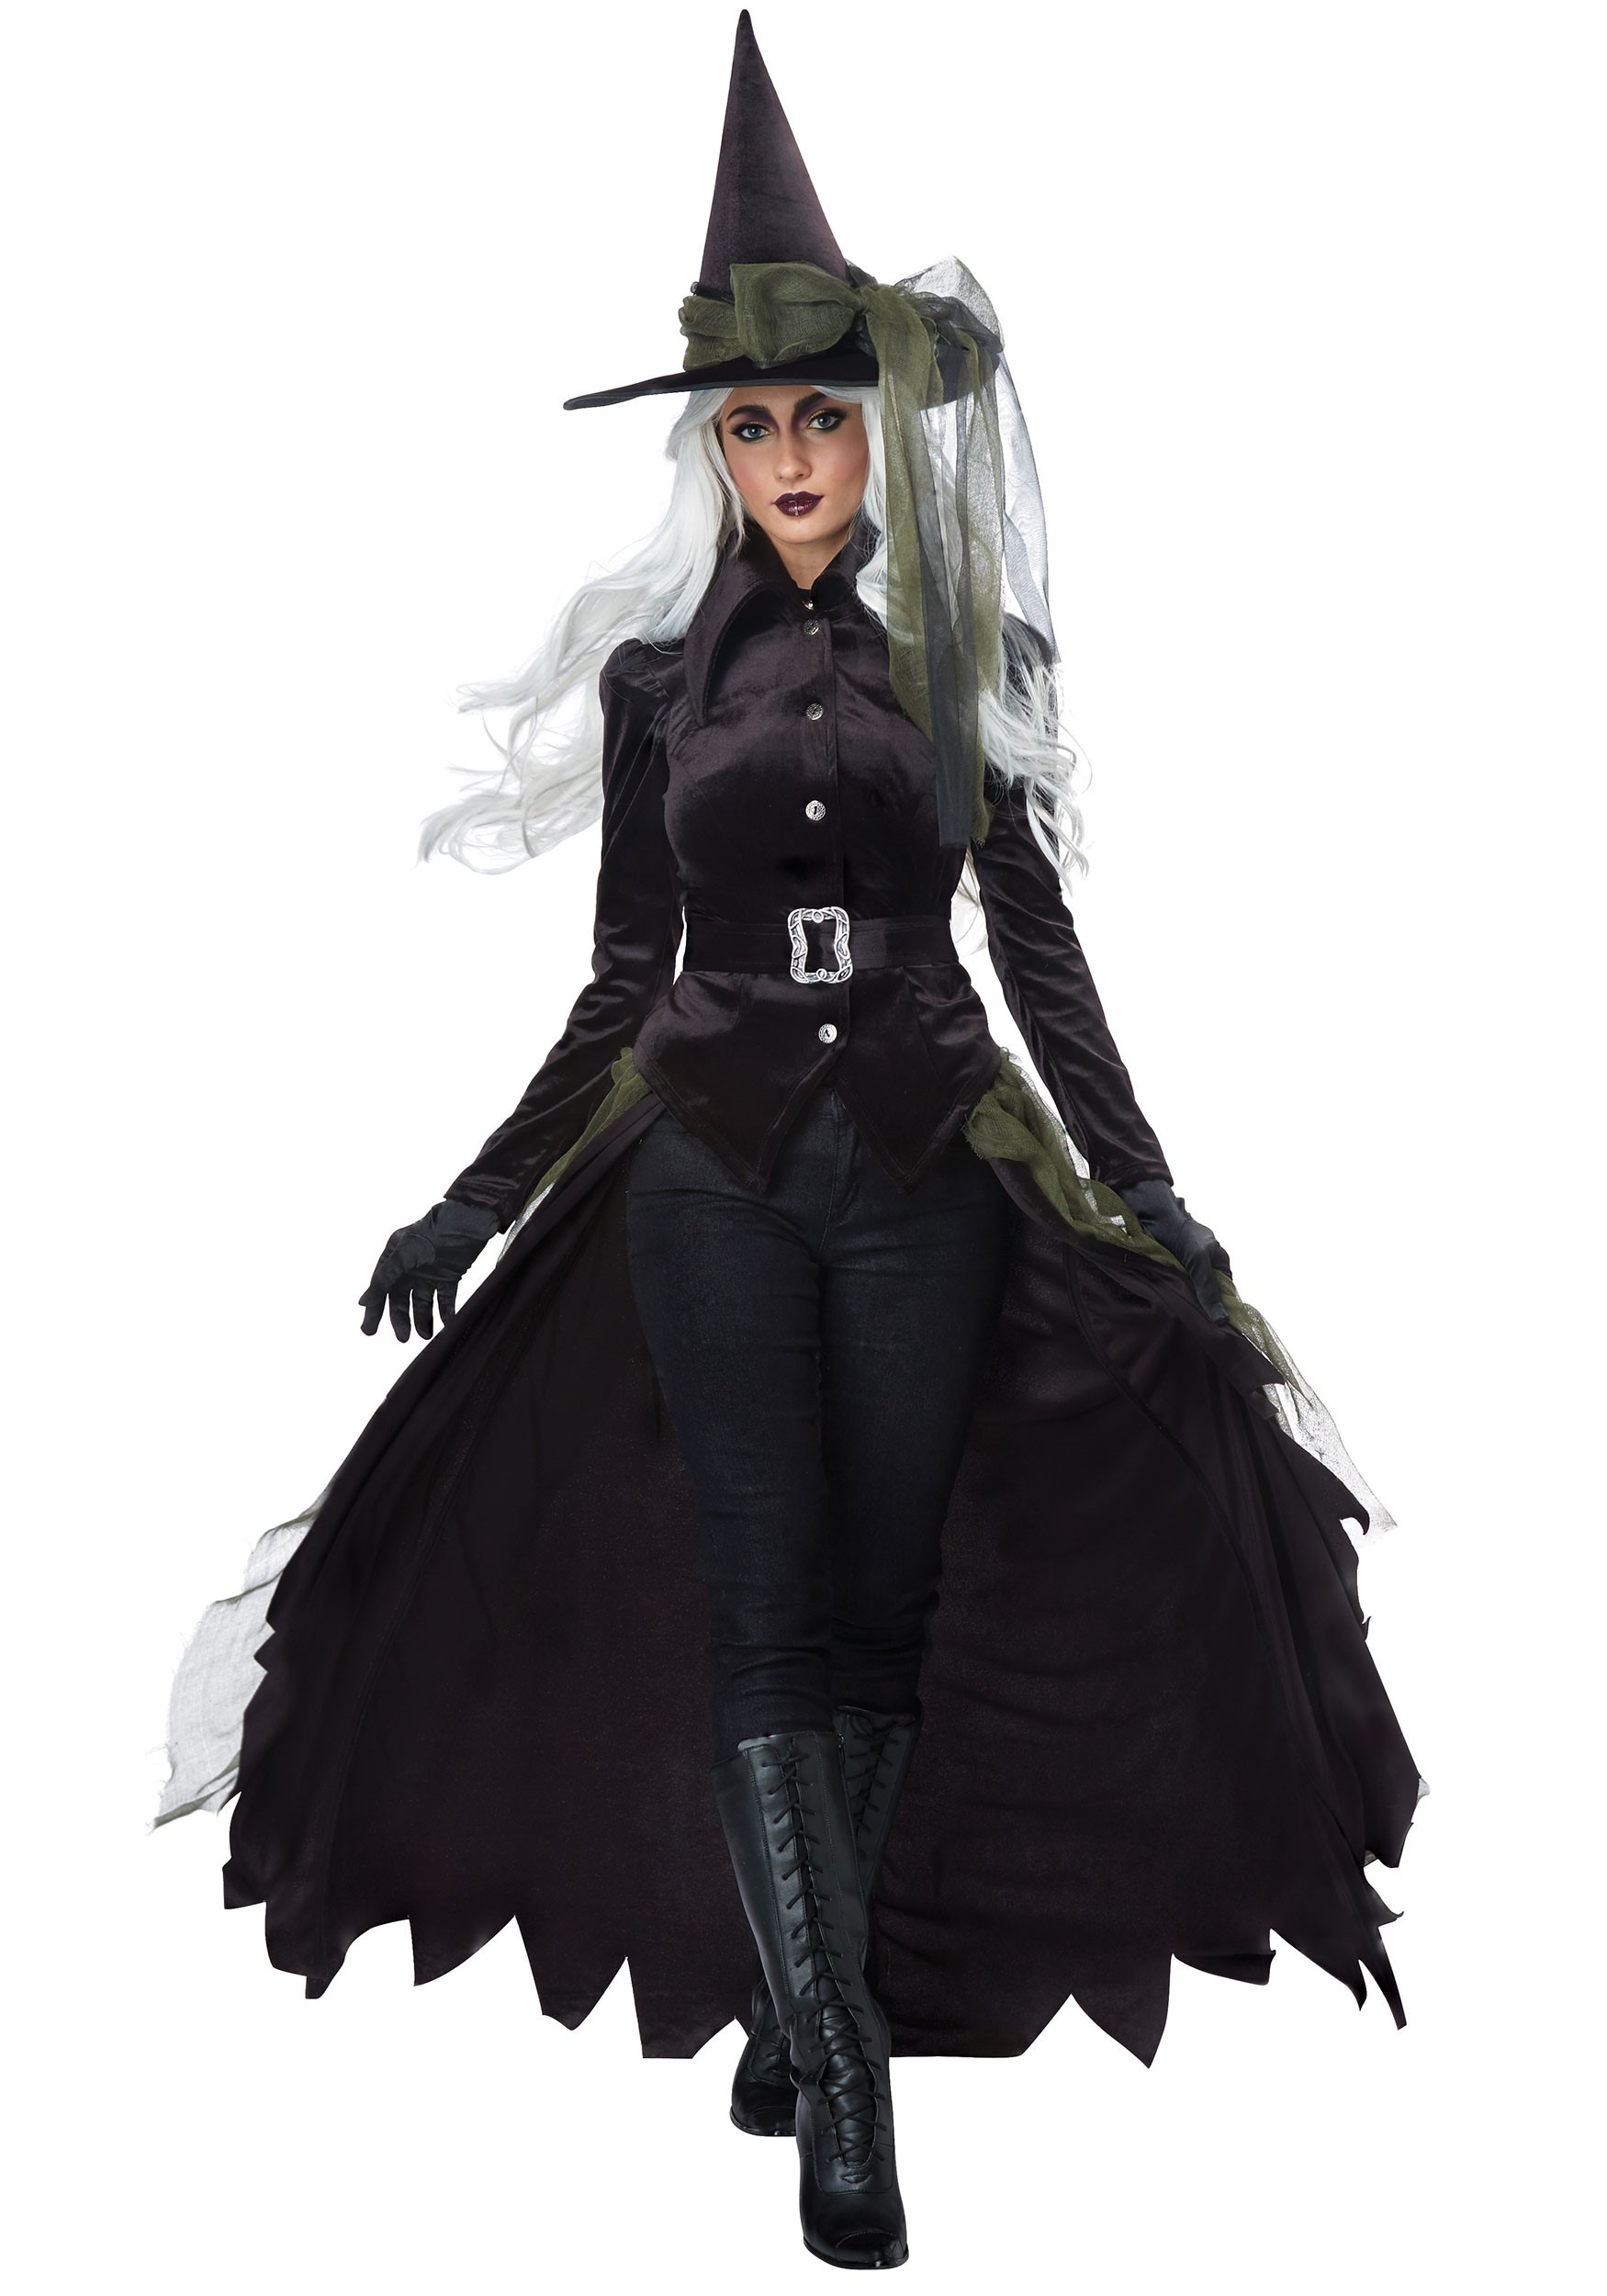 Cool Witch Fancy Dress Costume For Women , Adult Sorceress Fancy Dress Costume